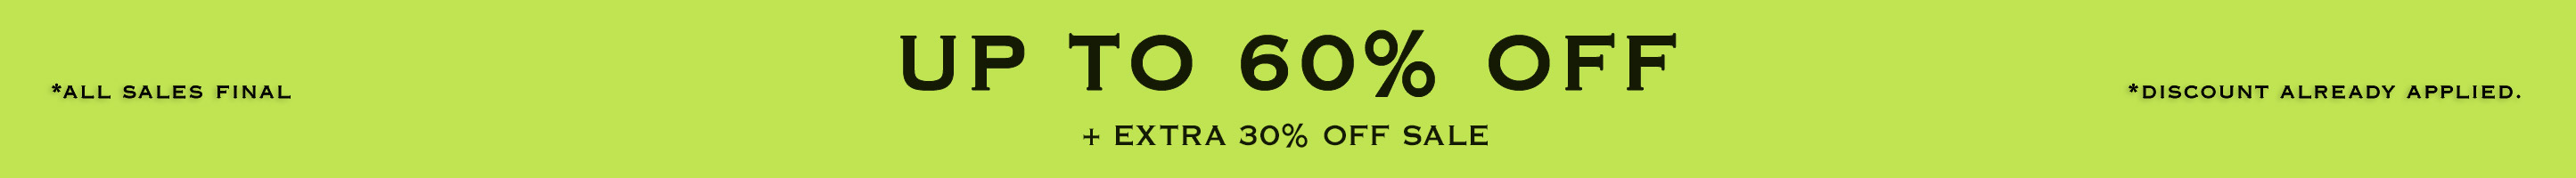 Up to 60% off + extra 30% off sale